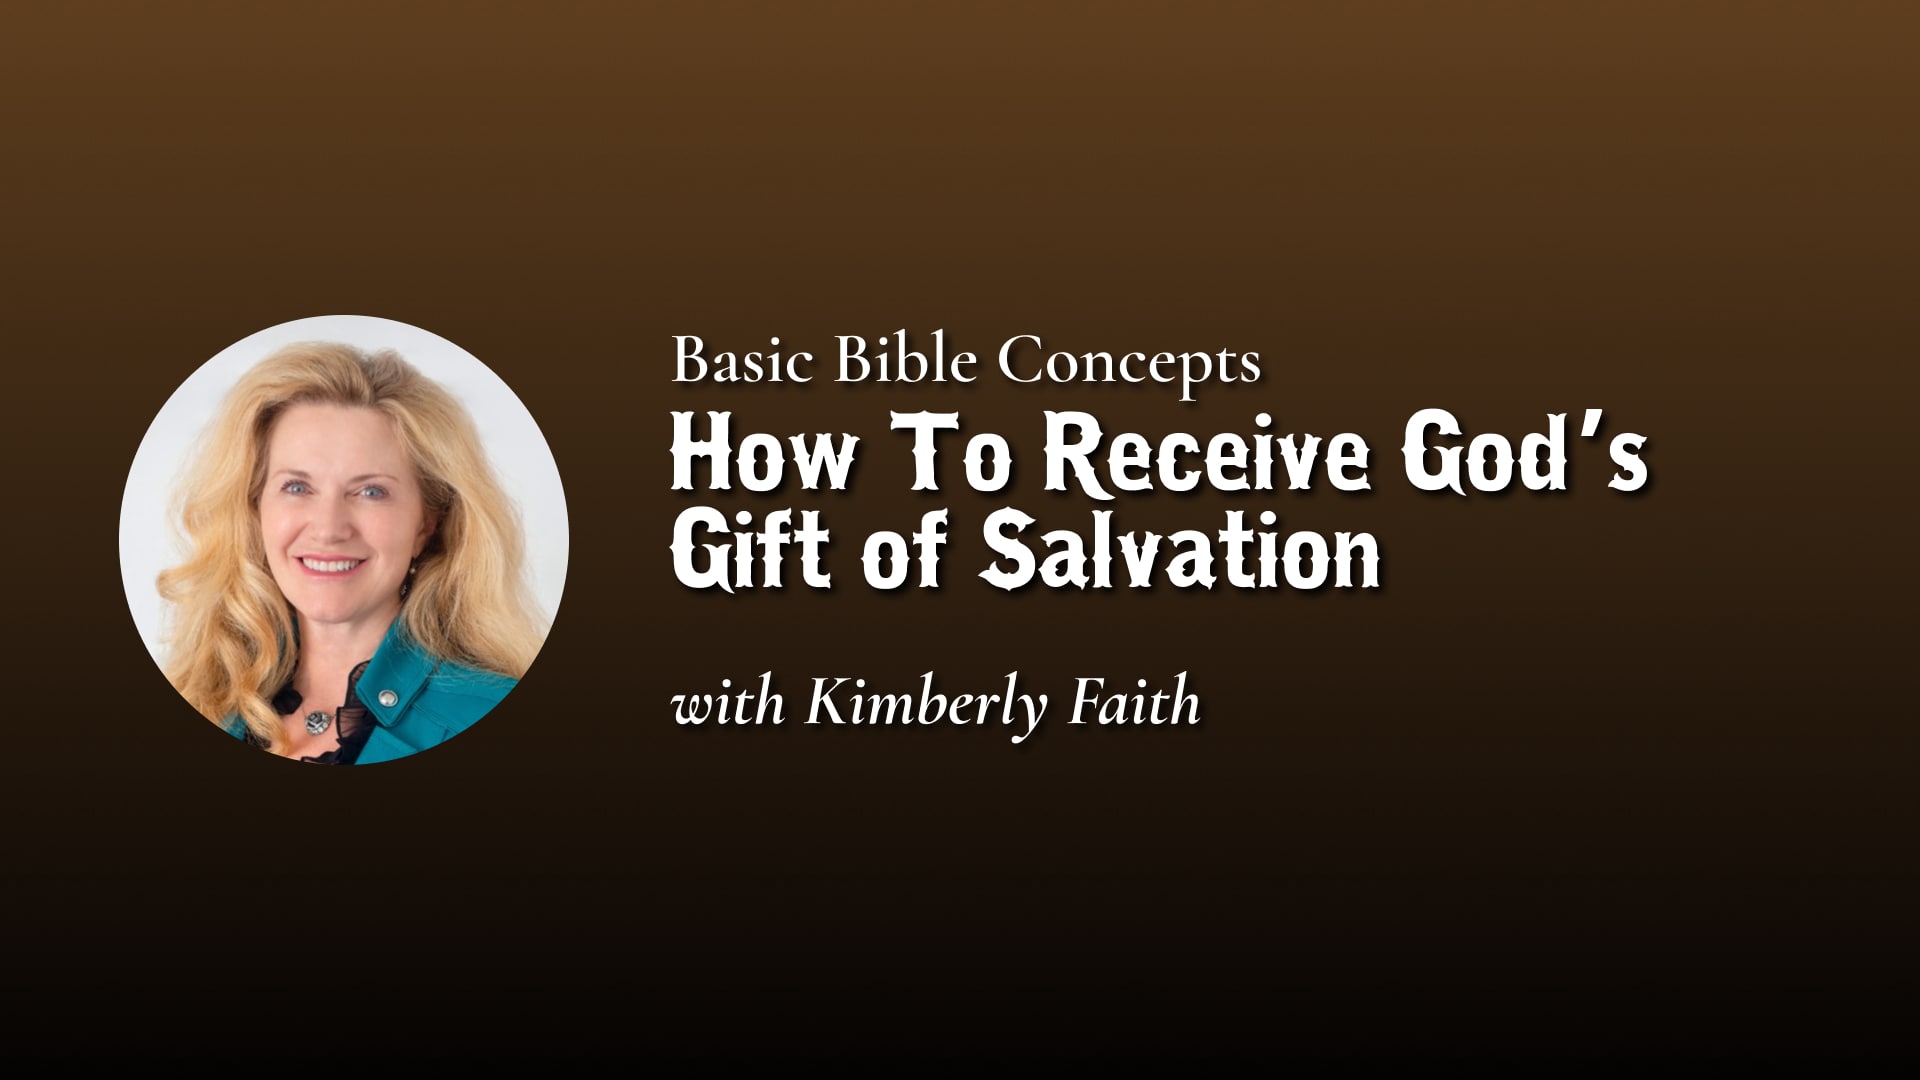 8 - How To Receive God’s Gift Of Salvation